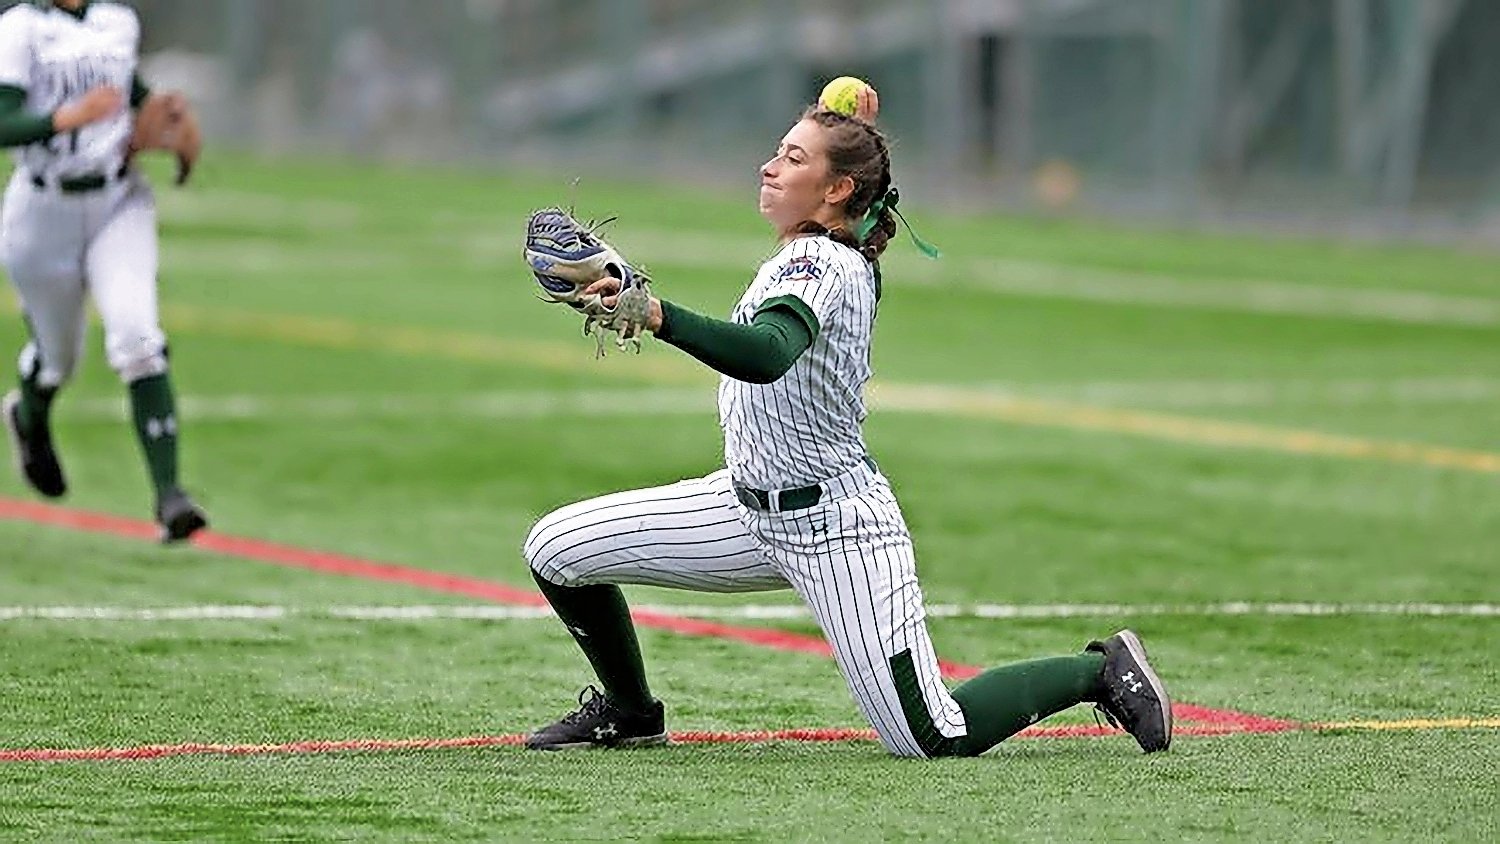 Manhattan College women’s softball team dropped a pair to the University of Hartford last weekend on the road by scores of 7-6 and 2-1.